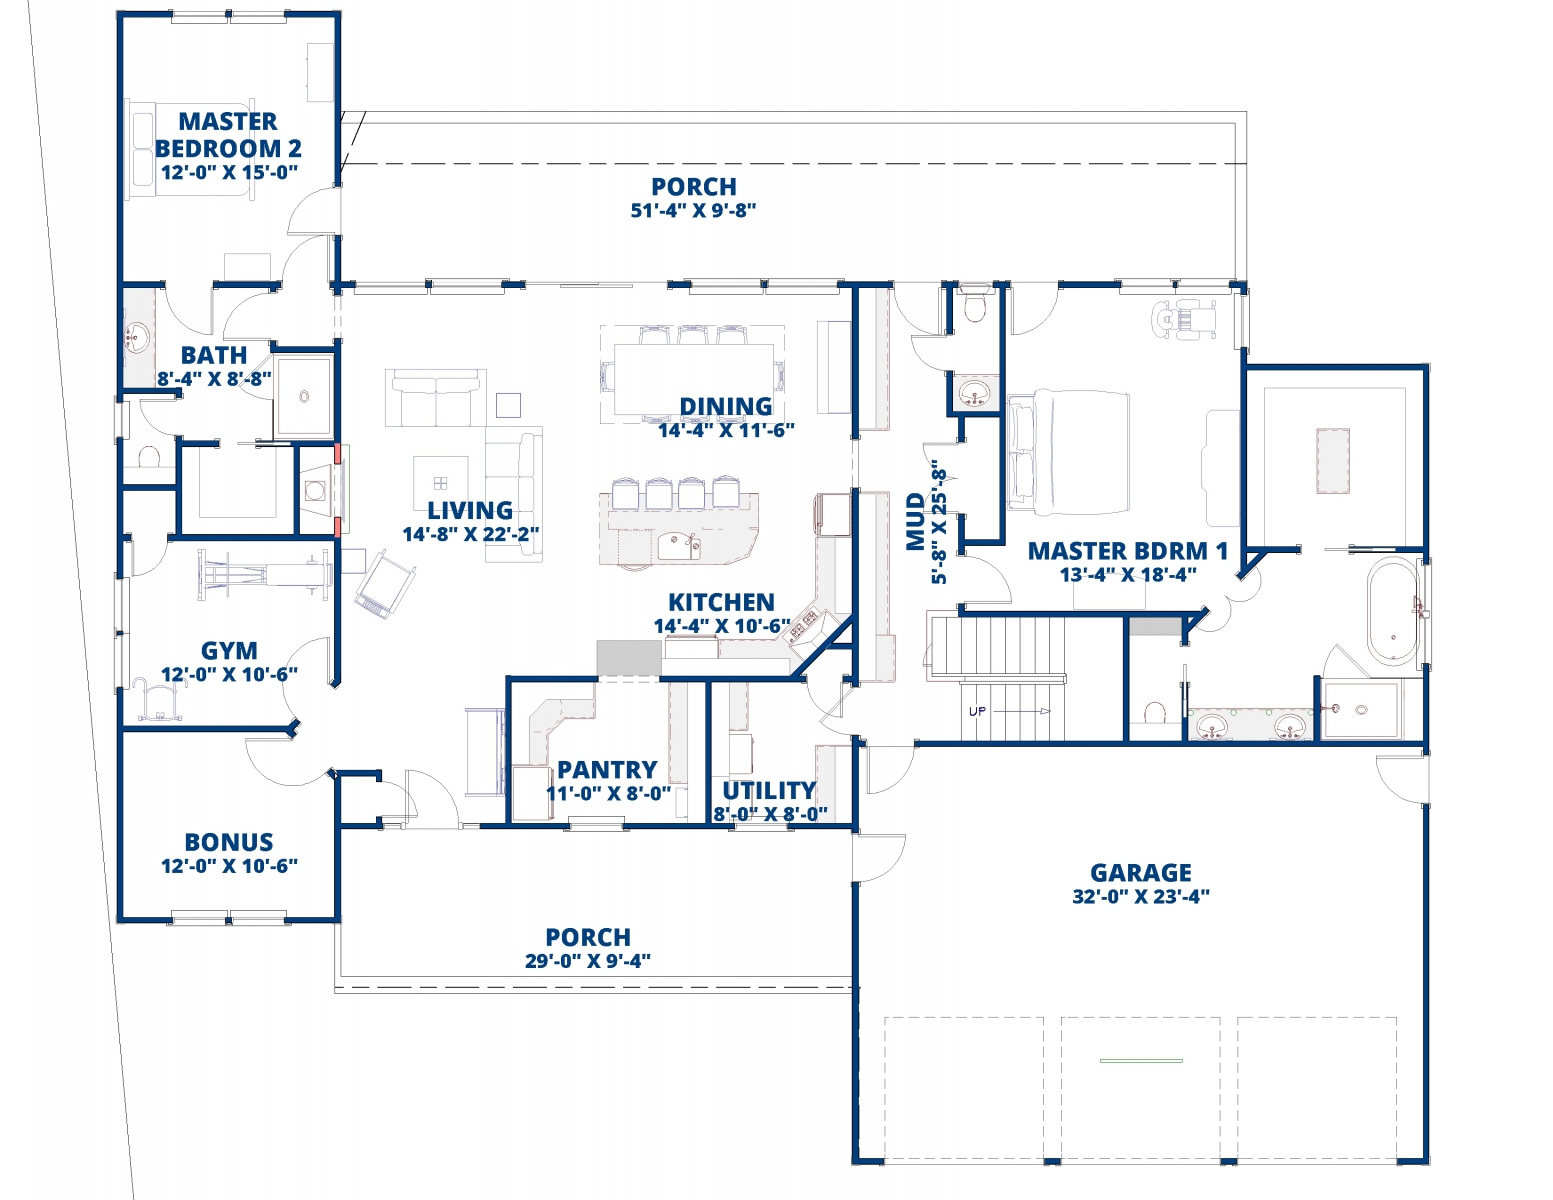 First floor layout of a home with a great room, large kitchen, two primary suites, a gym, and bonus room.